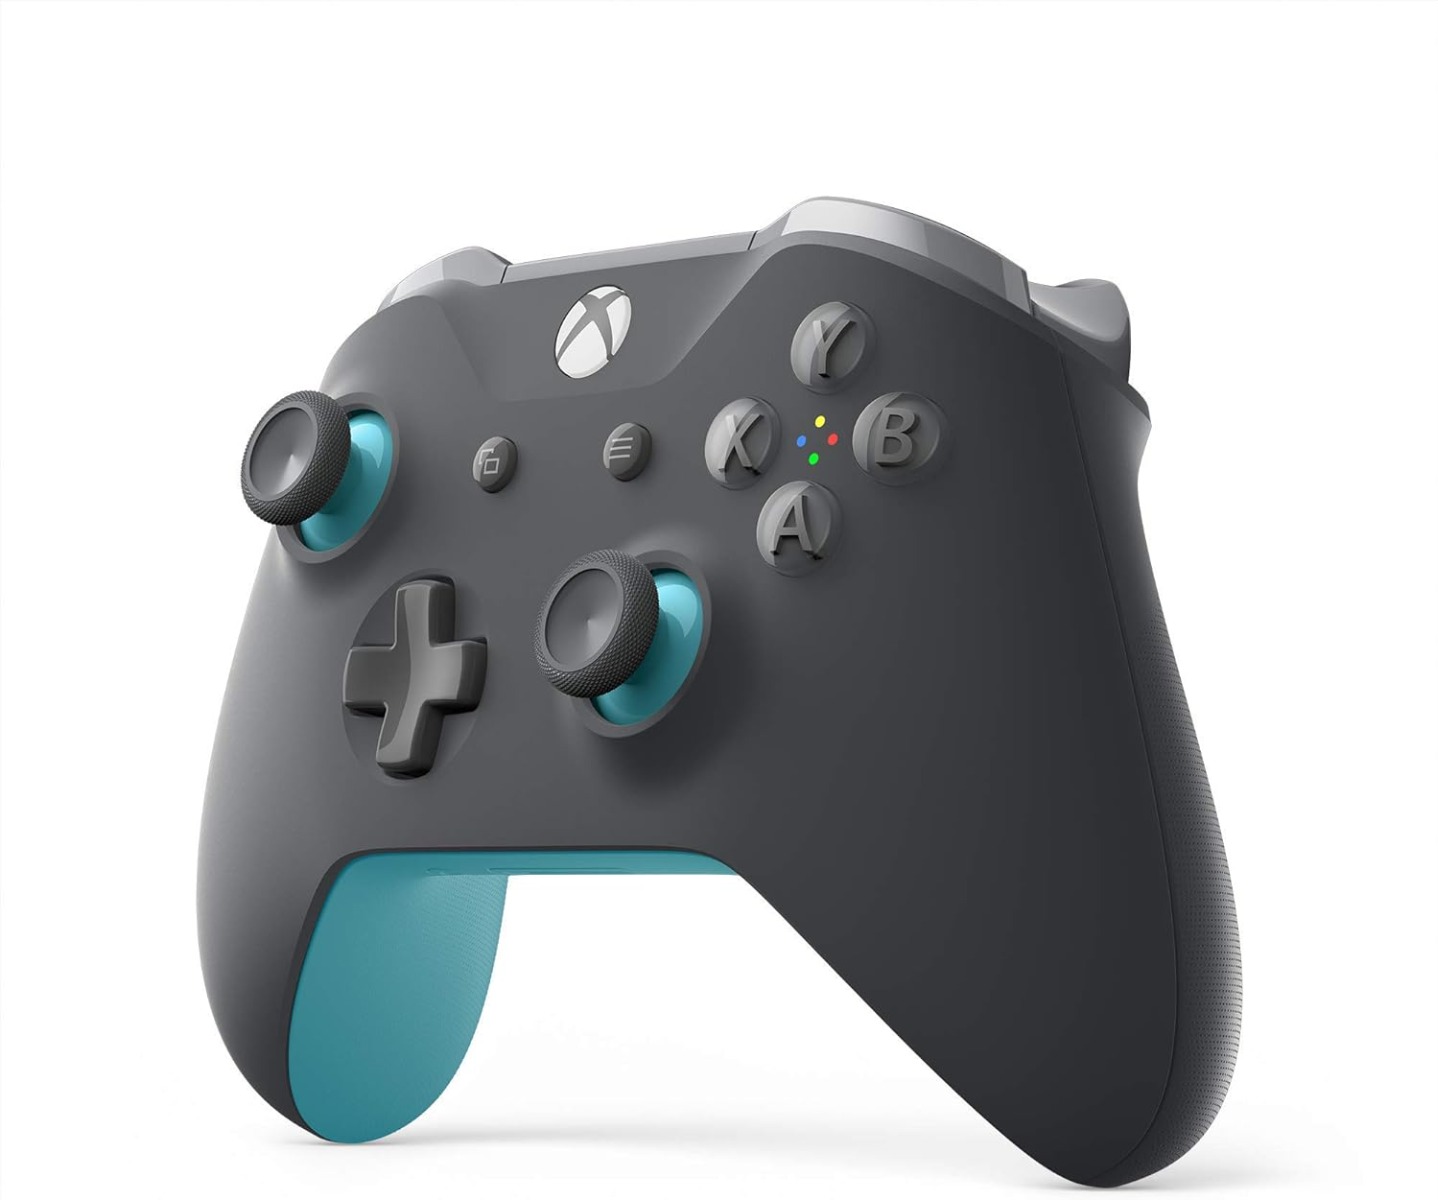 Microsoft Wireless Controller for Xbox One, Series X, and Series S - Gray/Blue